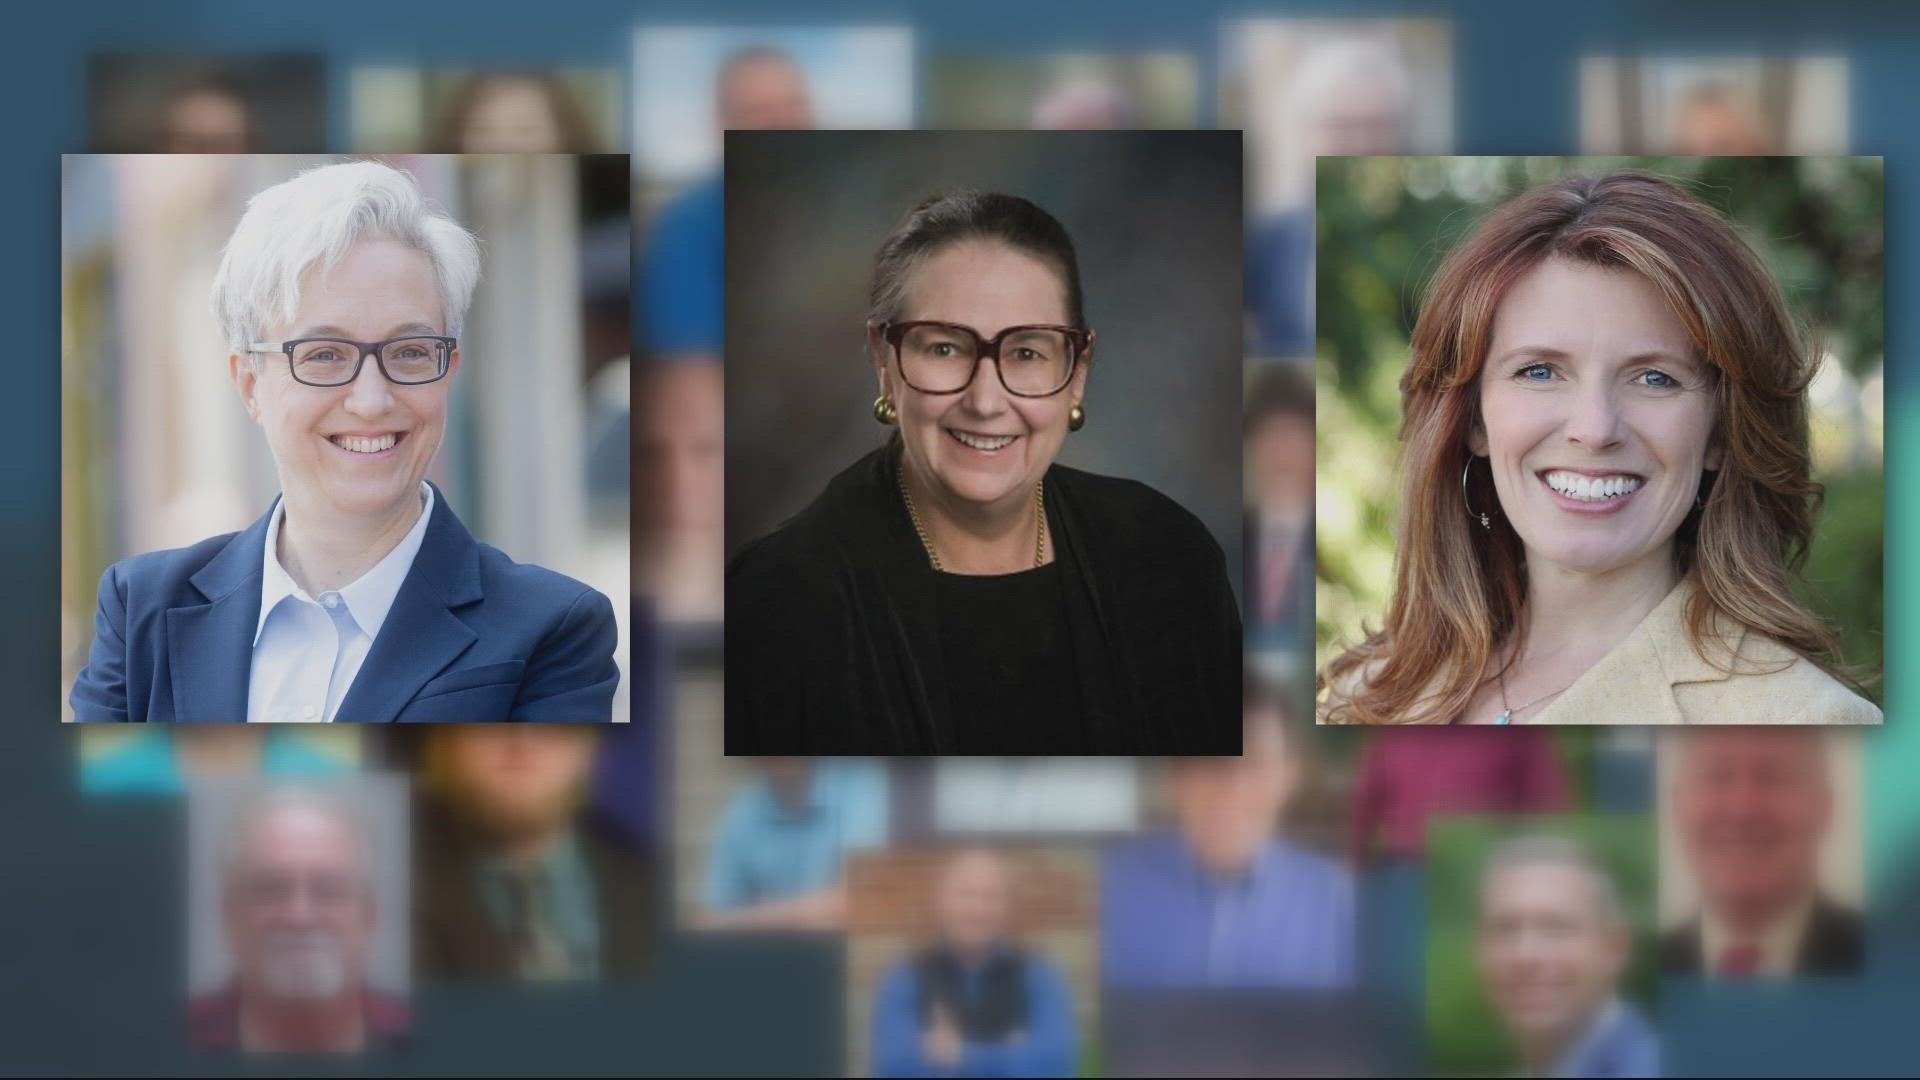 We quizzed Tina Kotek, Christine Drazan and Betsy Johnson about their records on gun control and how they would approach the issue as governor.